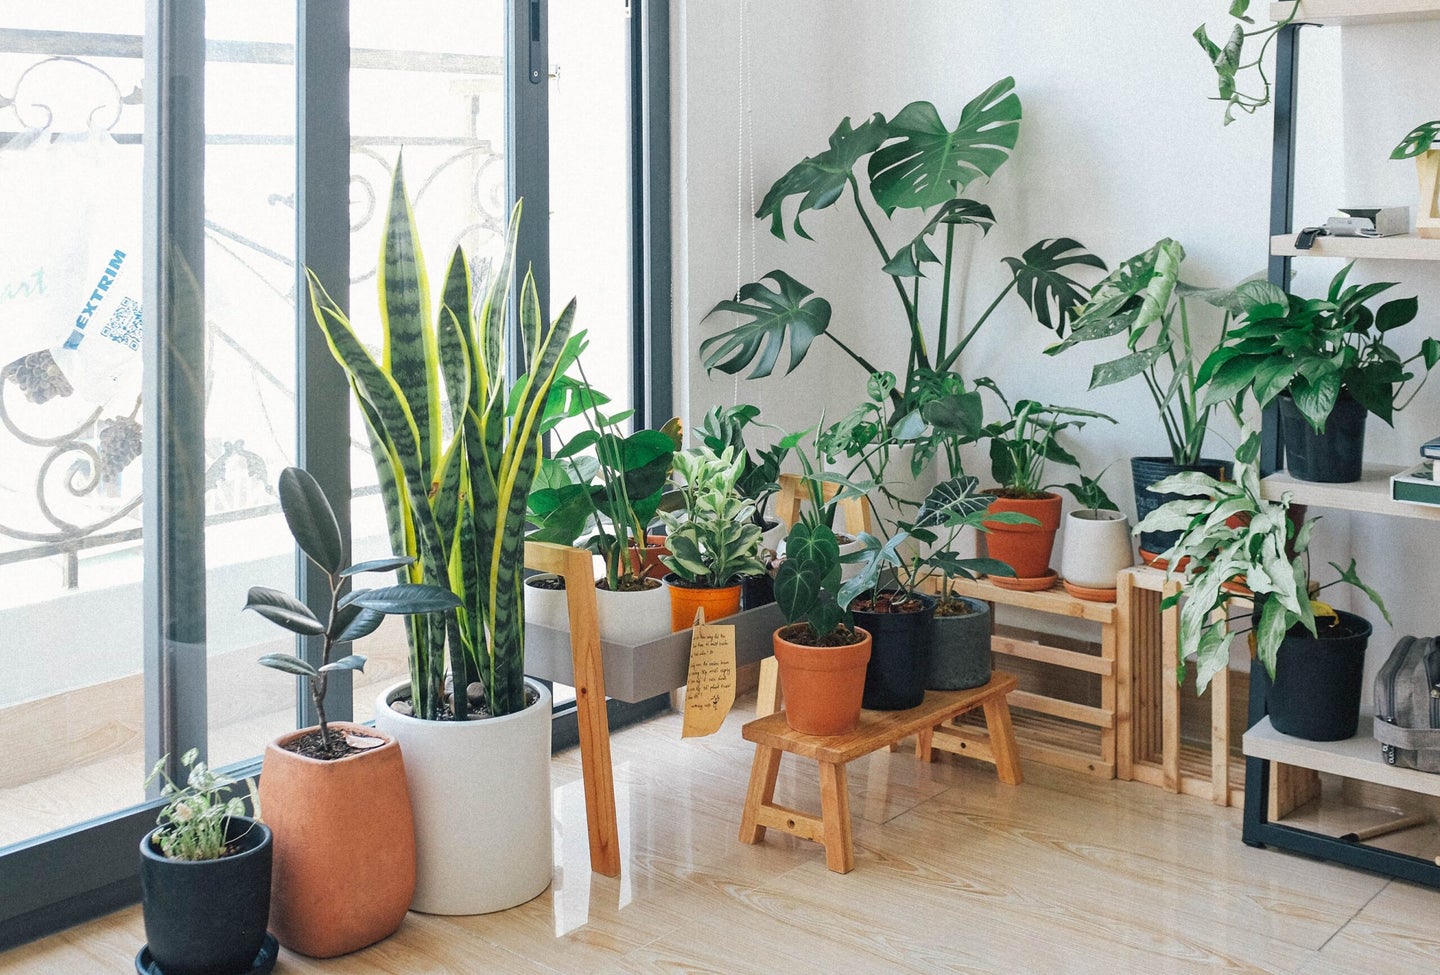 Light-filled room with lots of pots of houseplants